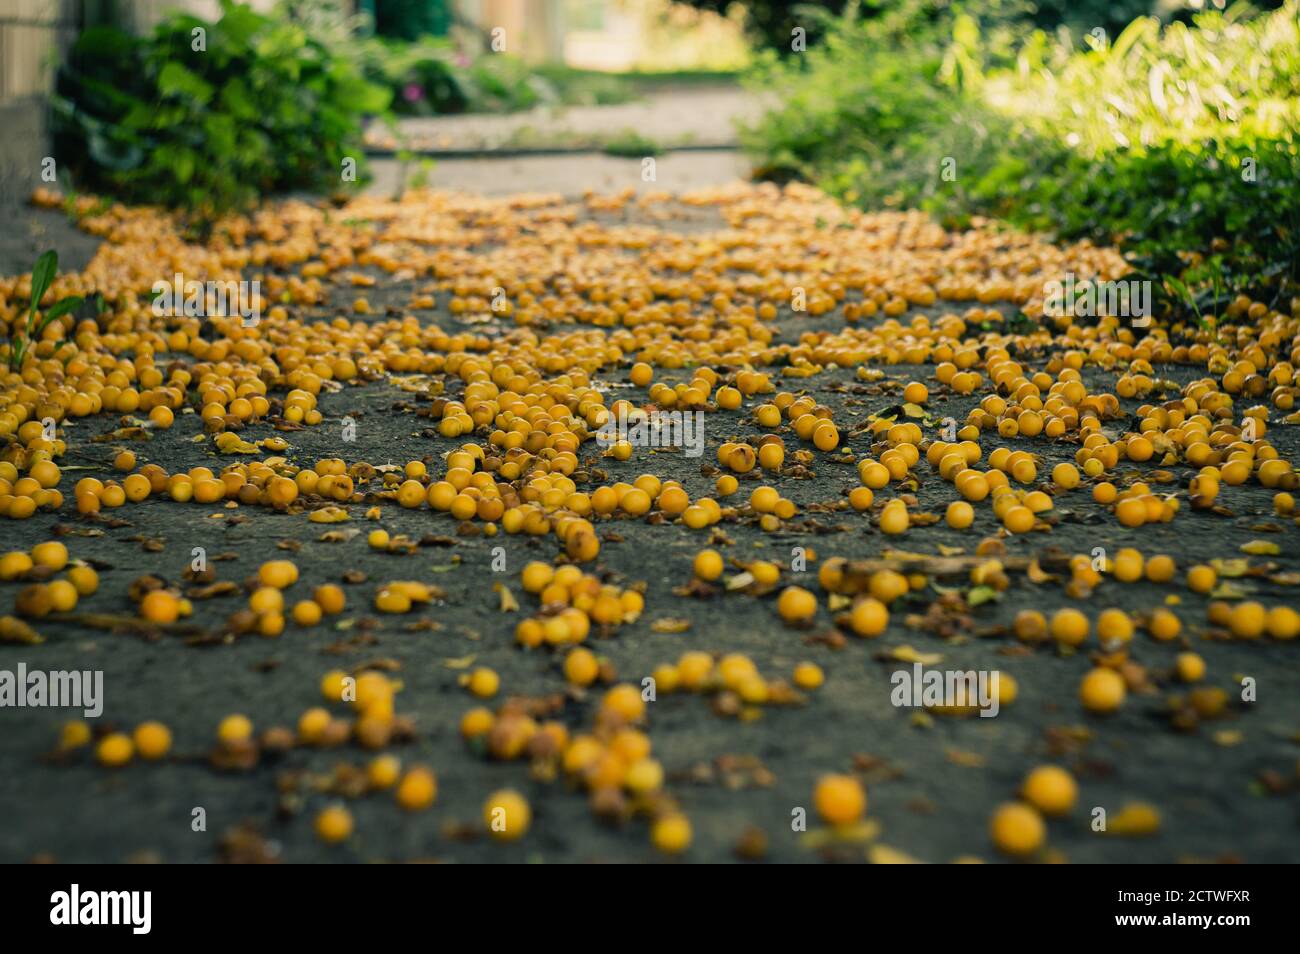 Many golden ripe cherry plums lie on the ground among the grasslands Stock Photo